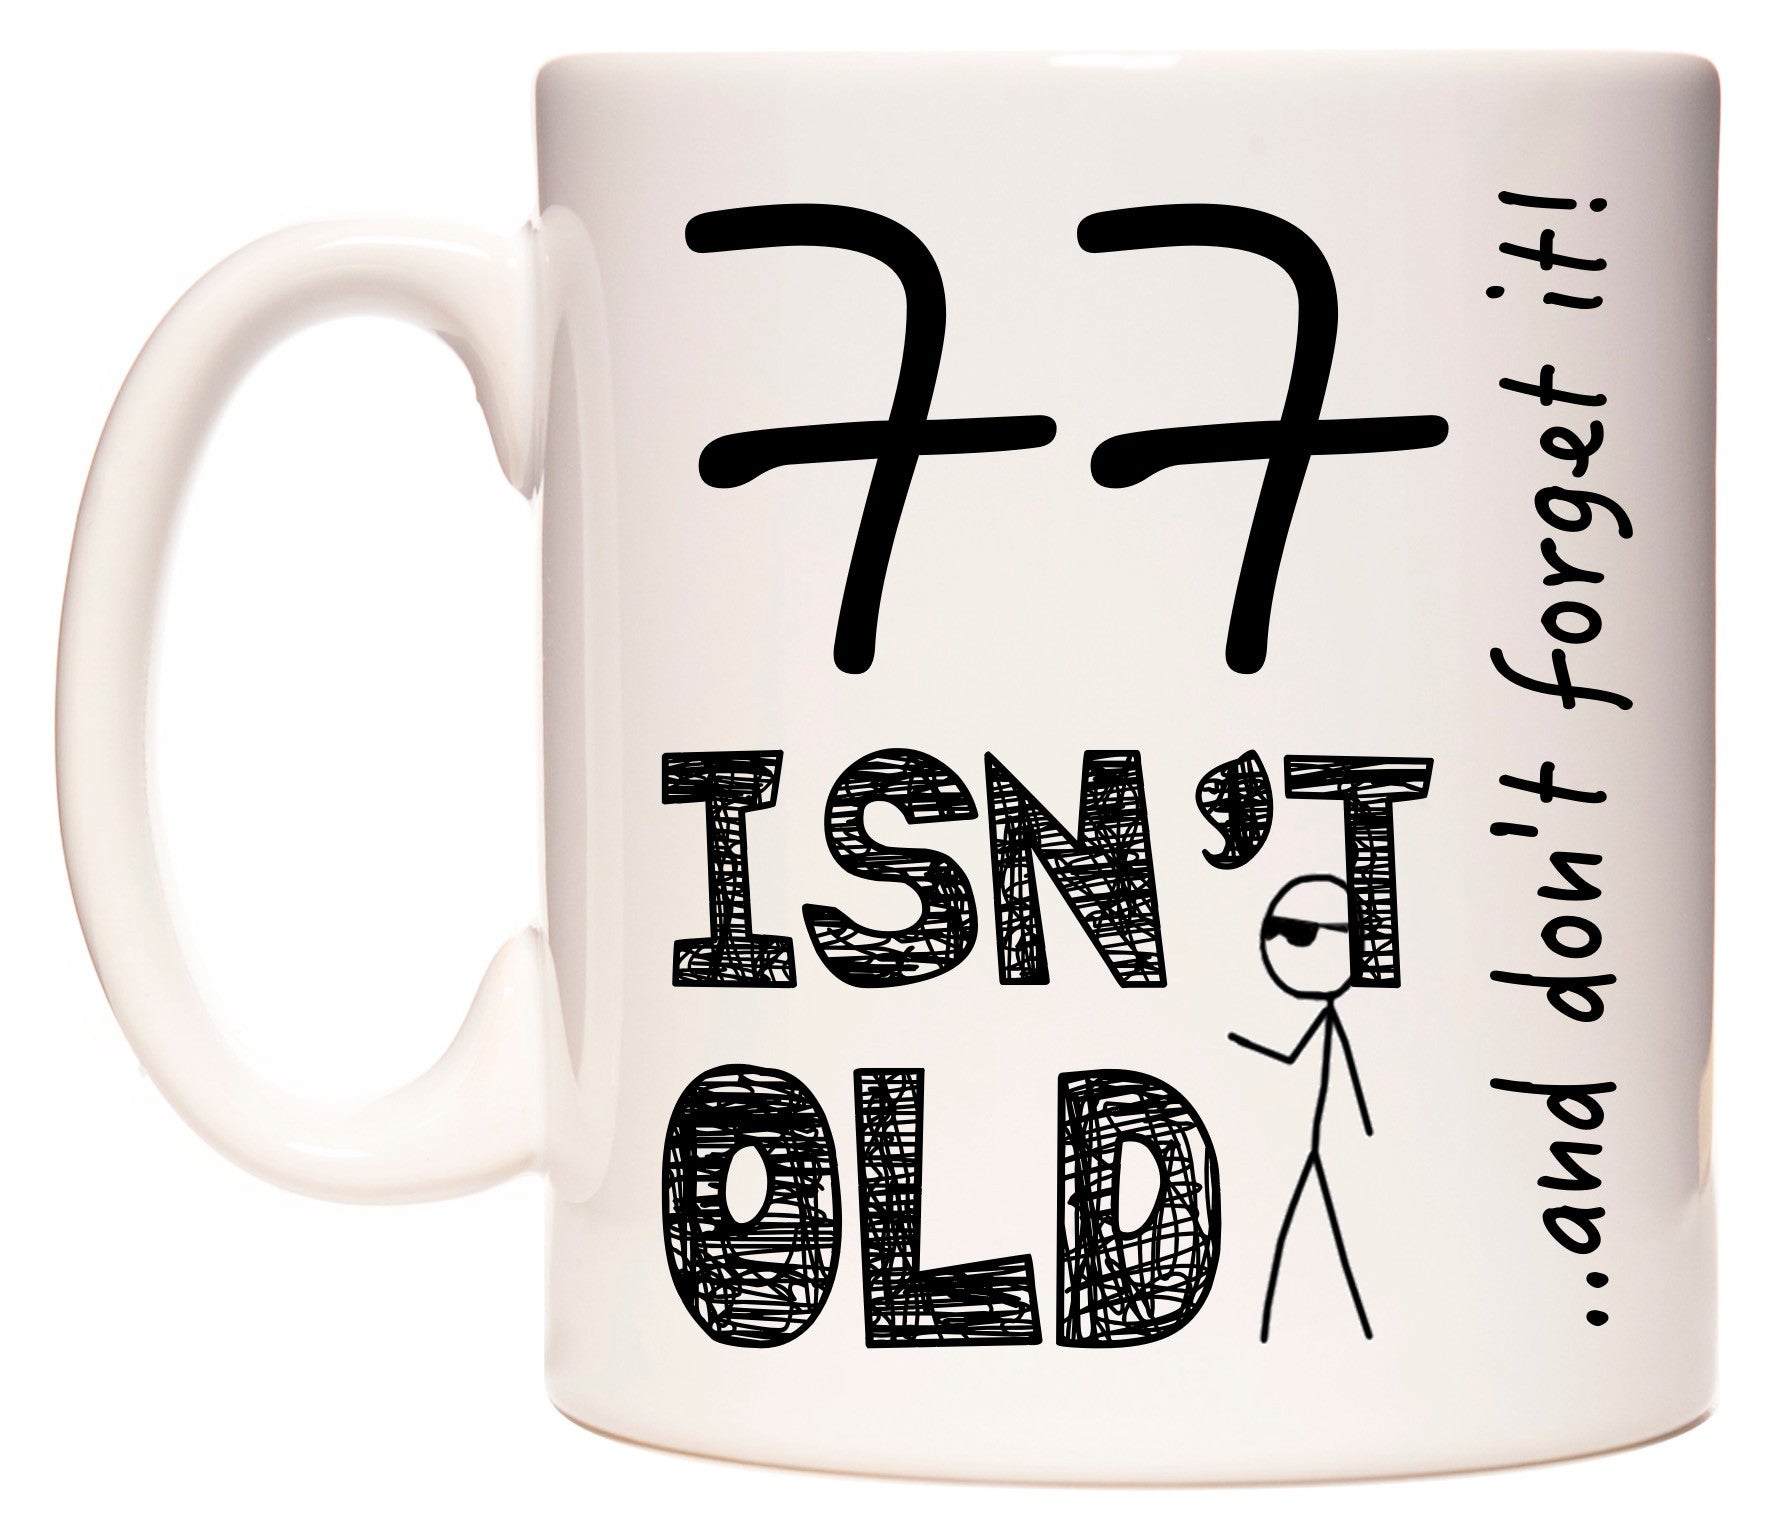 This mug features 77 Isn't Old